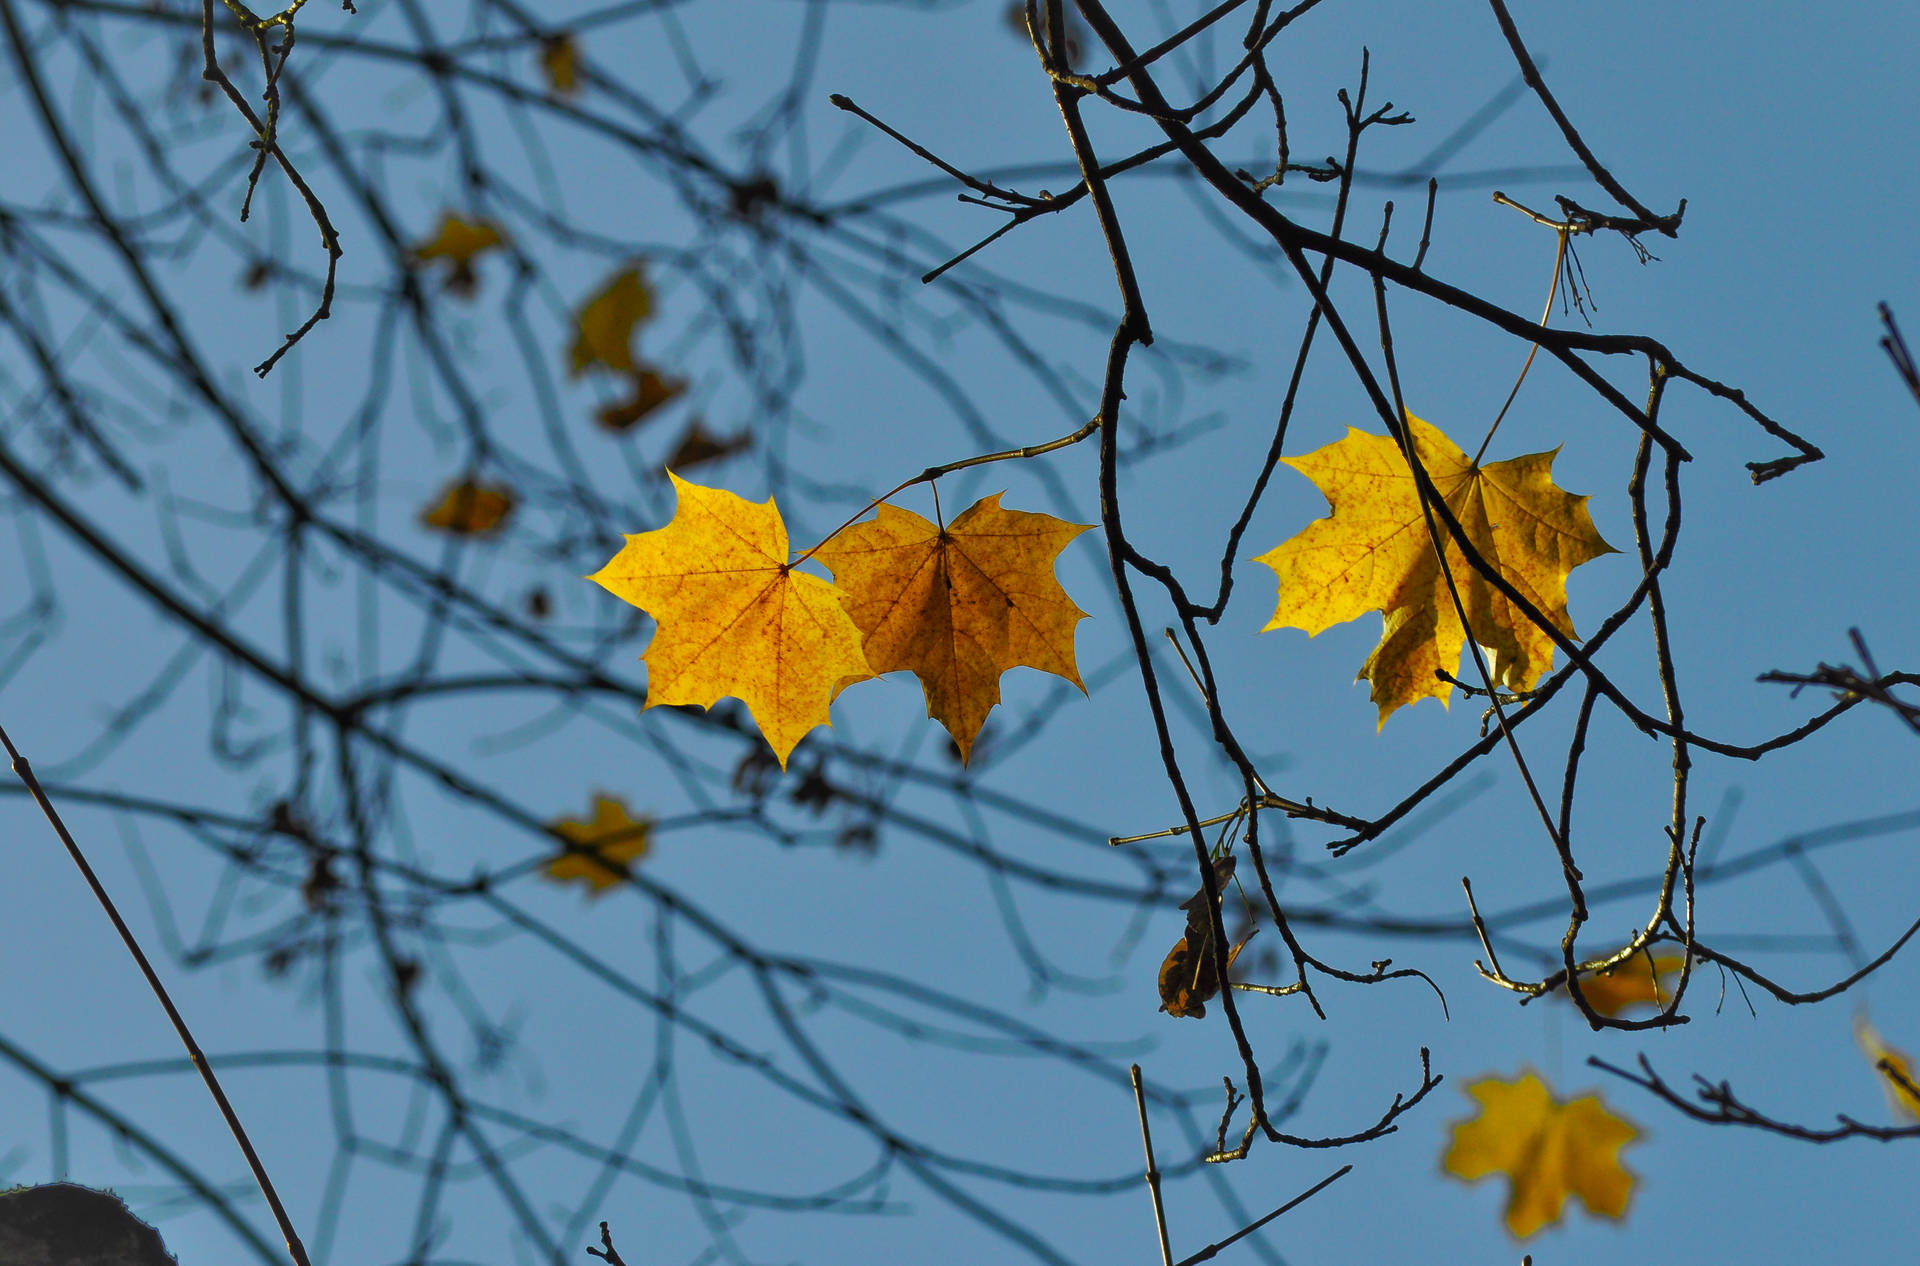 Blanket of autumn leaves on a crisp November day in beautiful blues and yellows Wallpaper